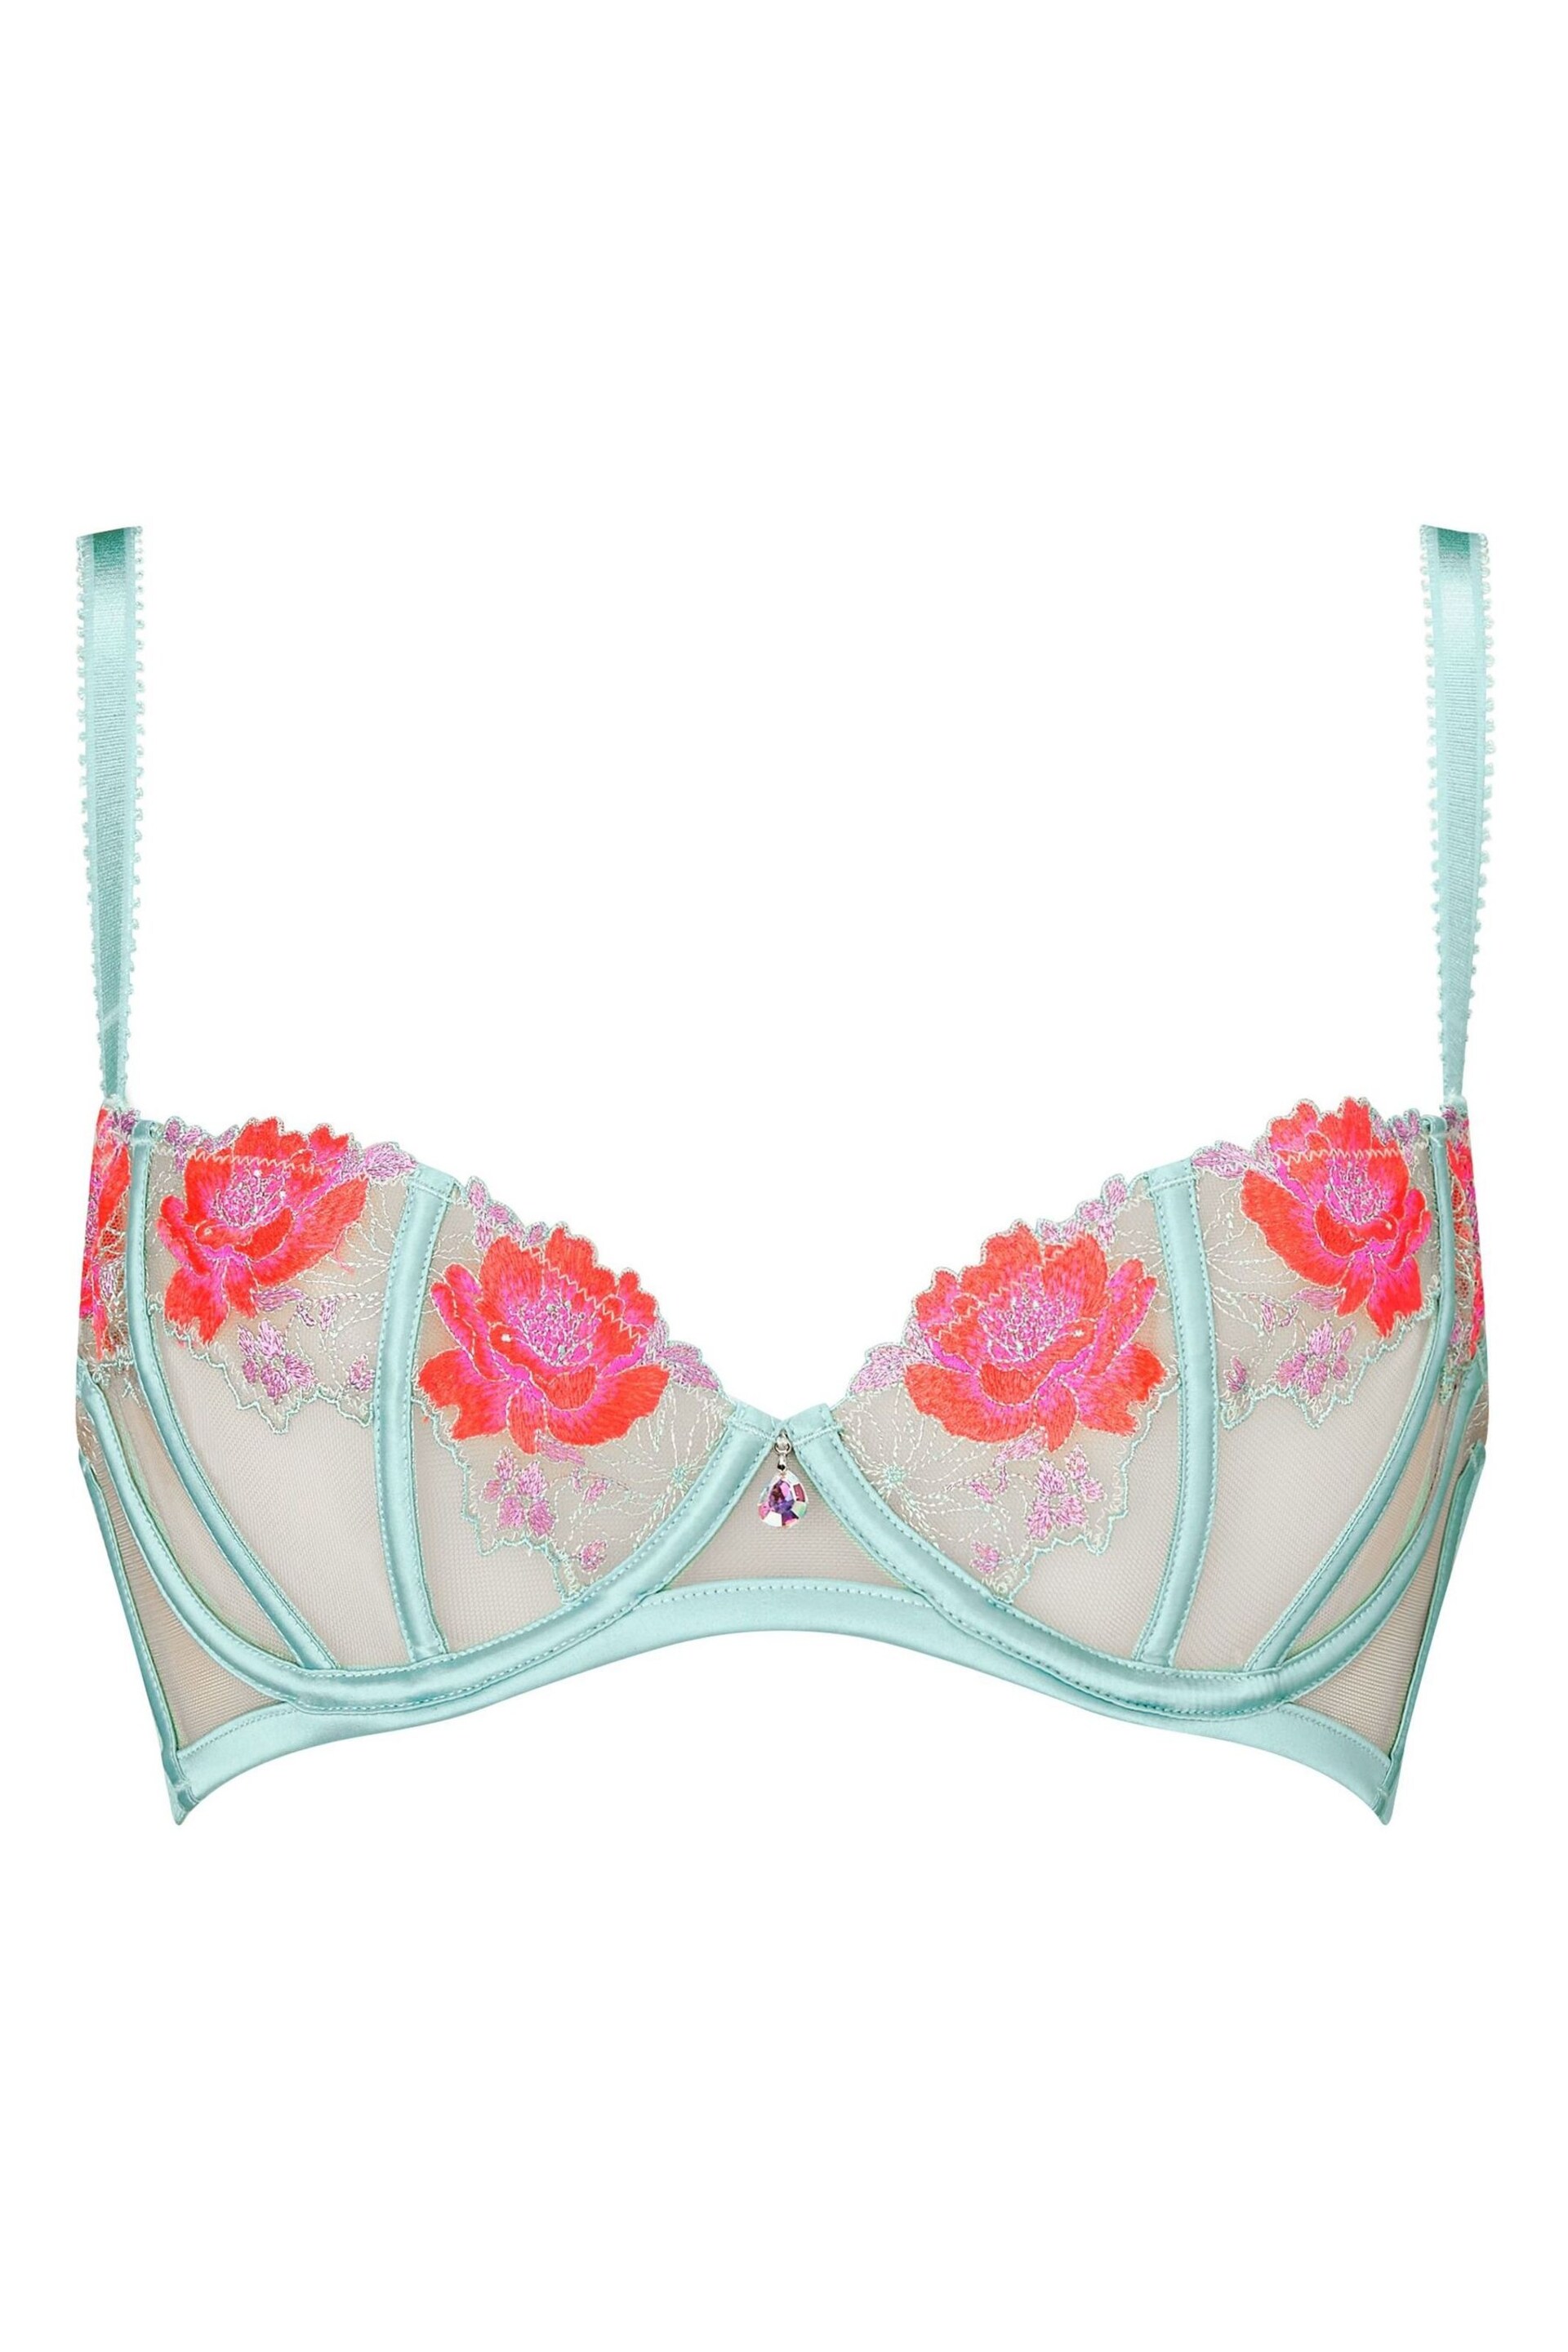 Ann Summers Blue Caged Rose Floral Embroidery Non Padded Balcony Bra - Image 4 of 5